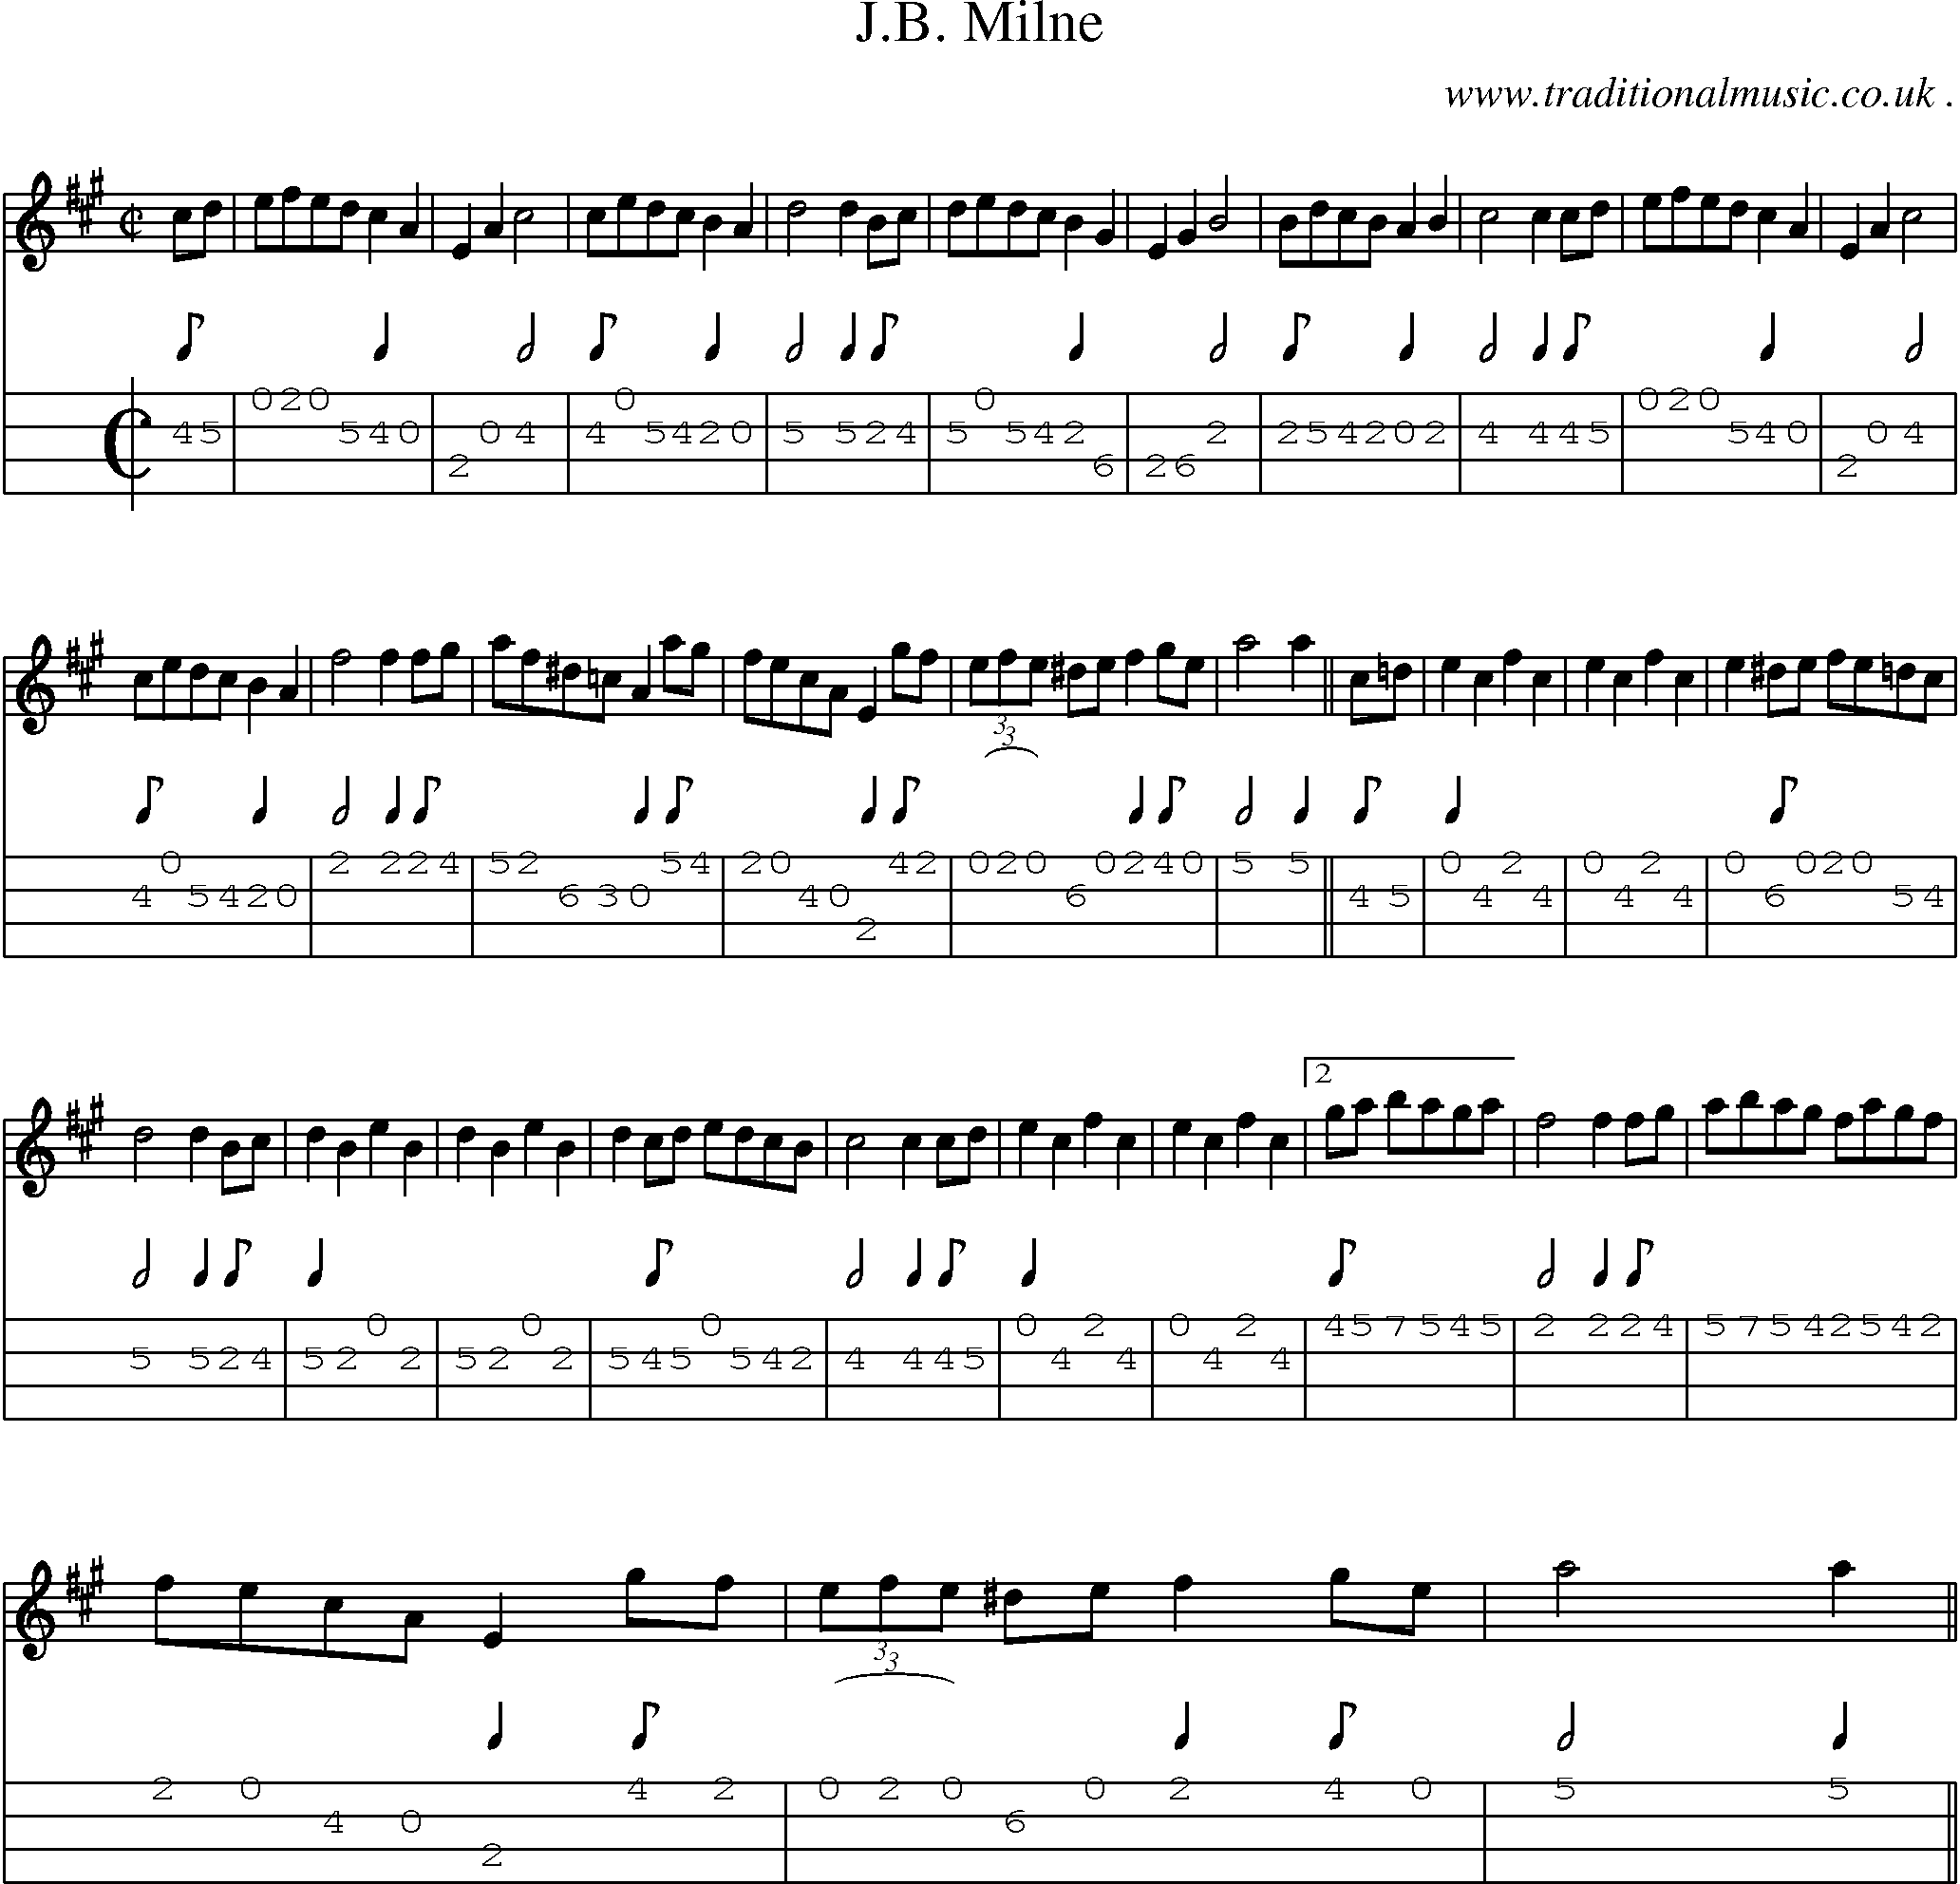 Sheet-music  score, Chords and Mandolin Tabs for Jb Milne